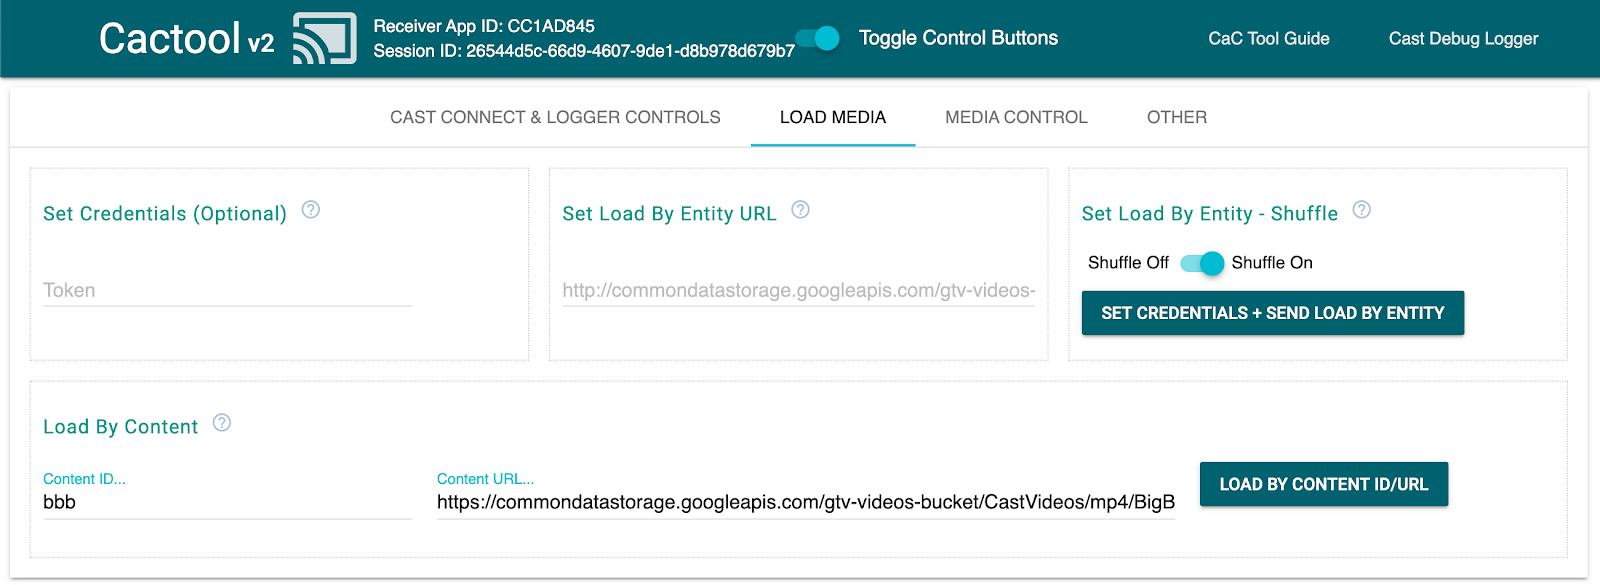 Command and Control (CaC) 工具的「Load Media」分頁圖片